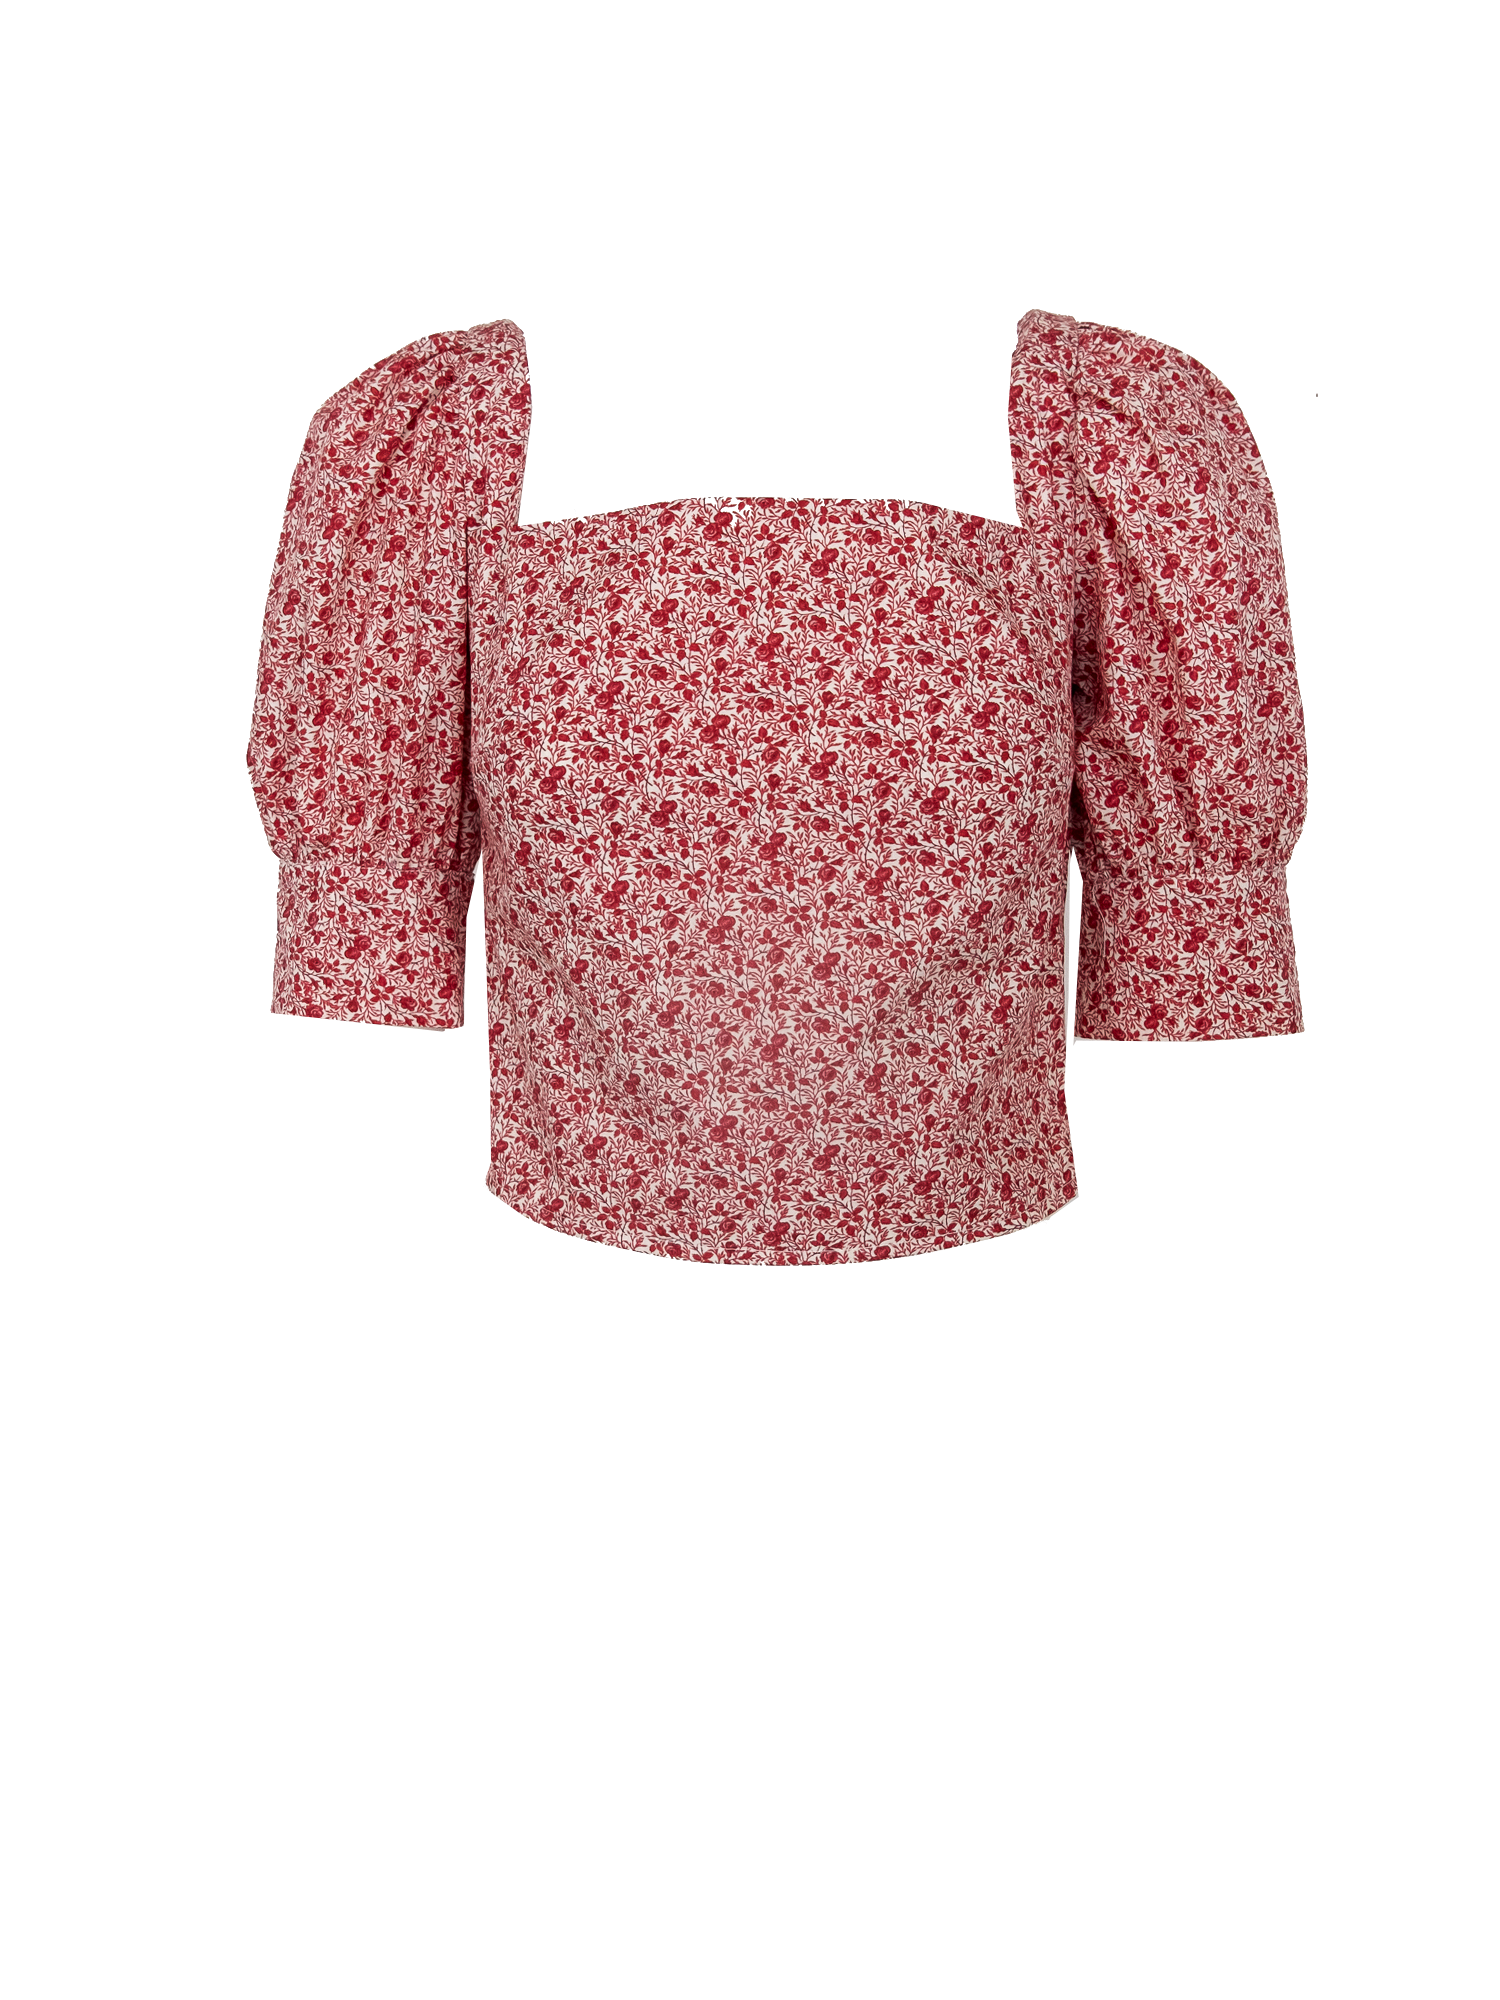 CAMELIA - cotton tops in patterned Mirabell